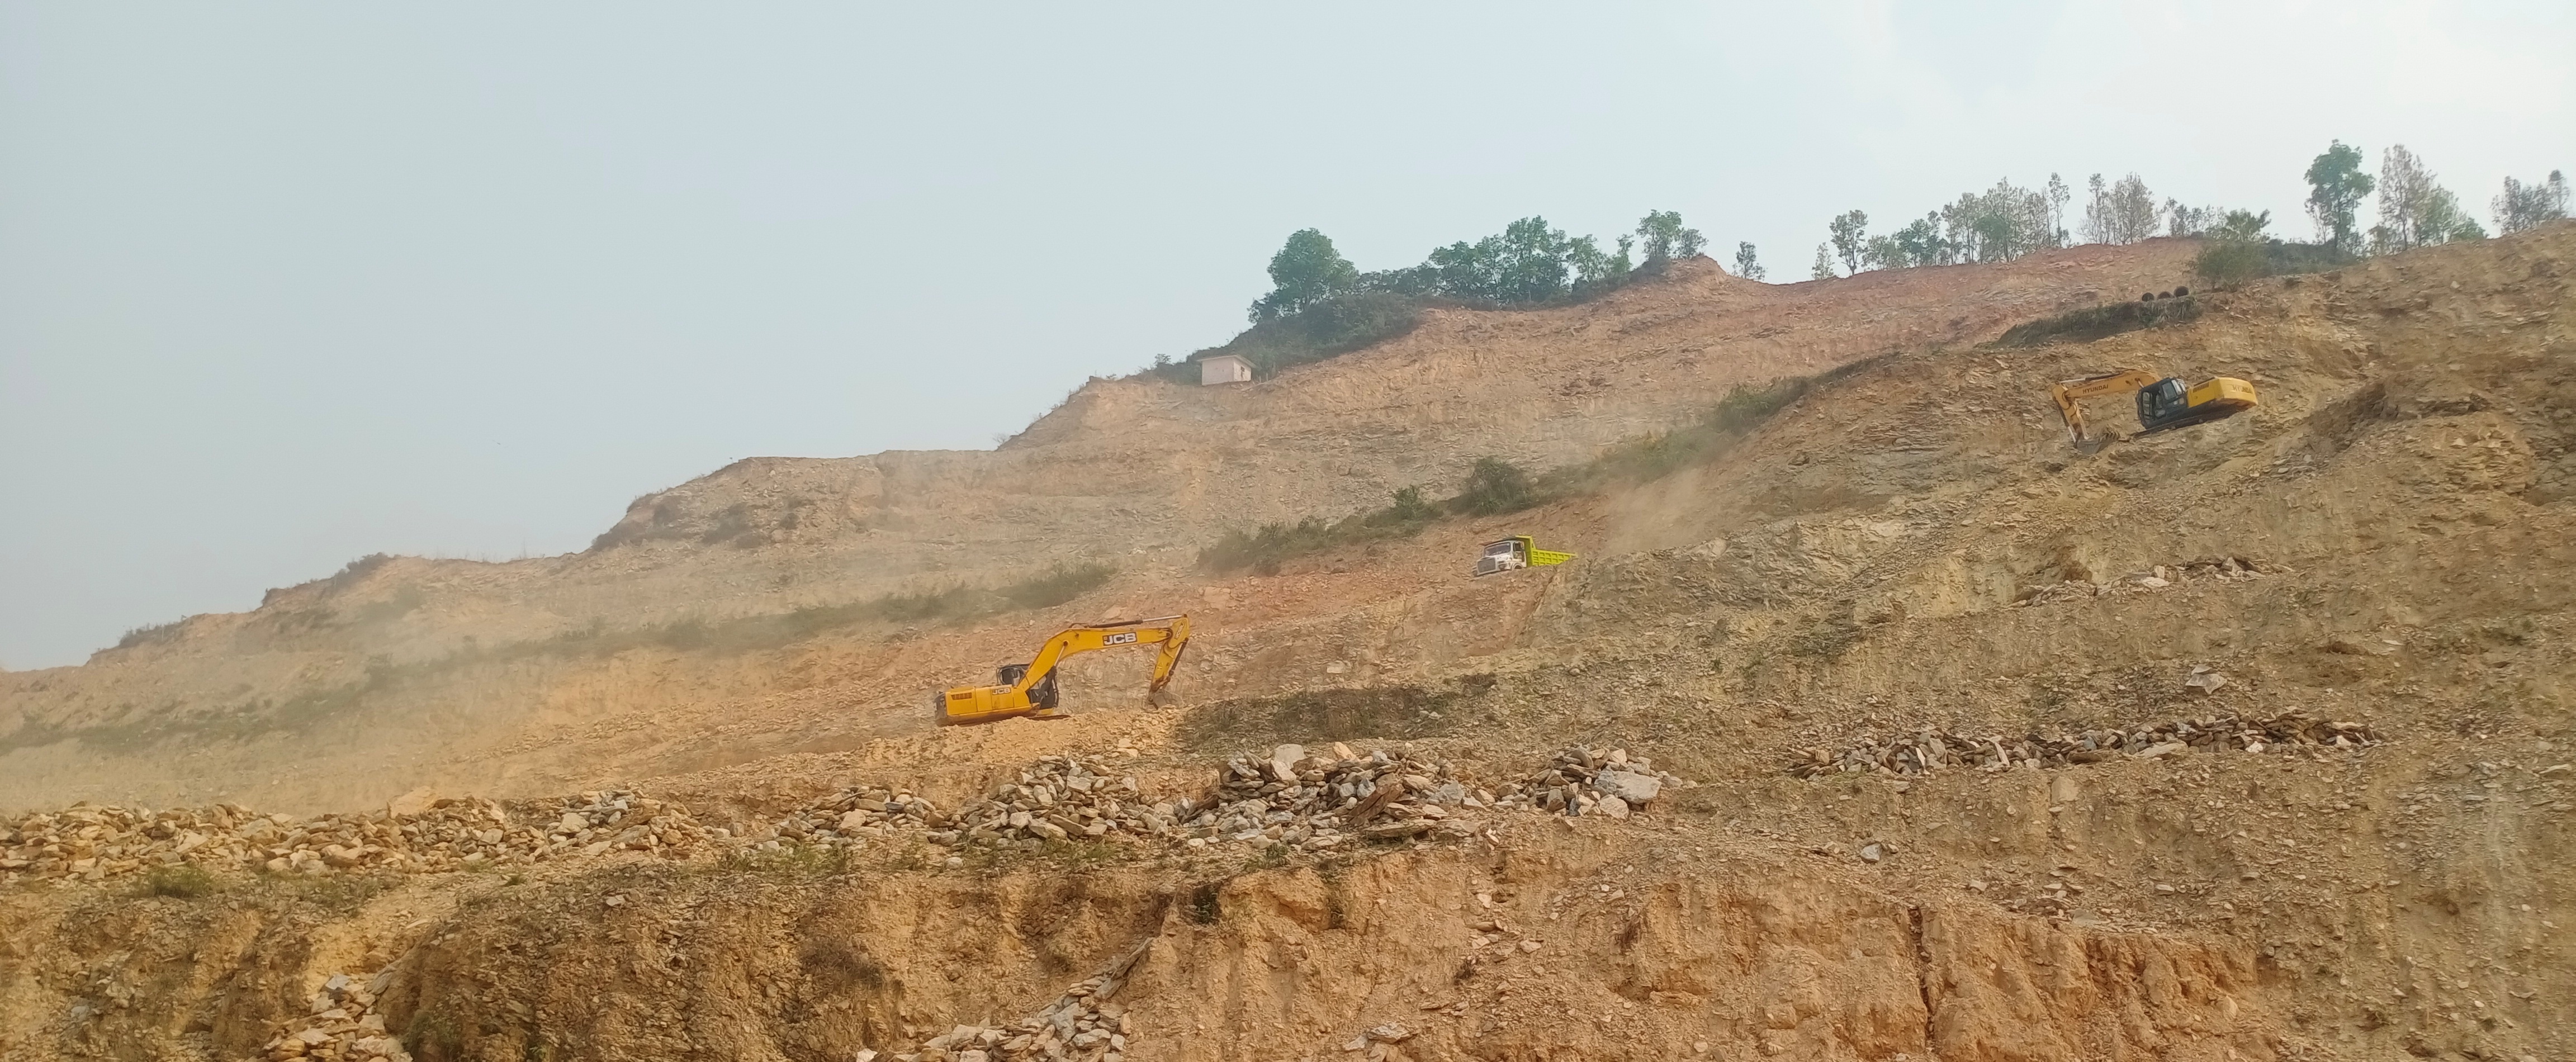 work-to-demolish-rithepani-hill-begins-to-ease-for-aircraft-to-land-take-off